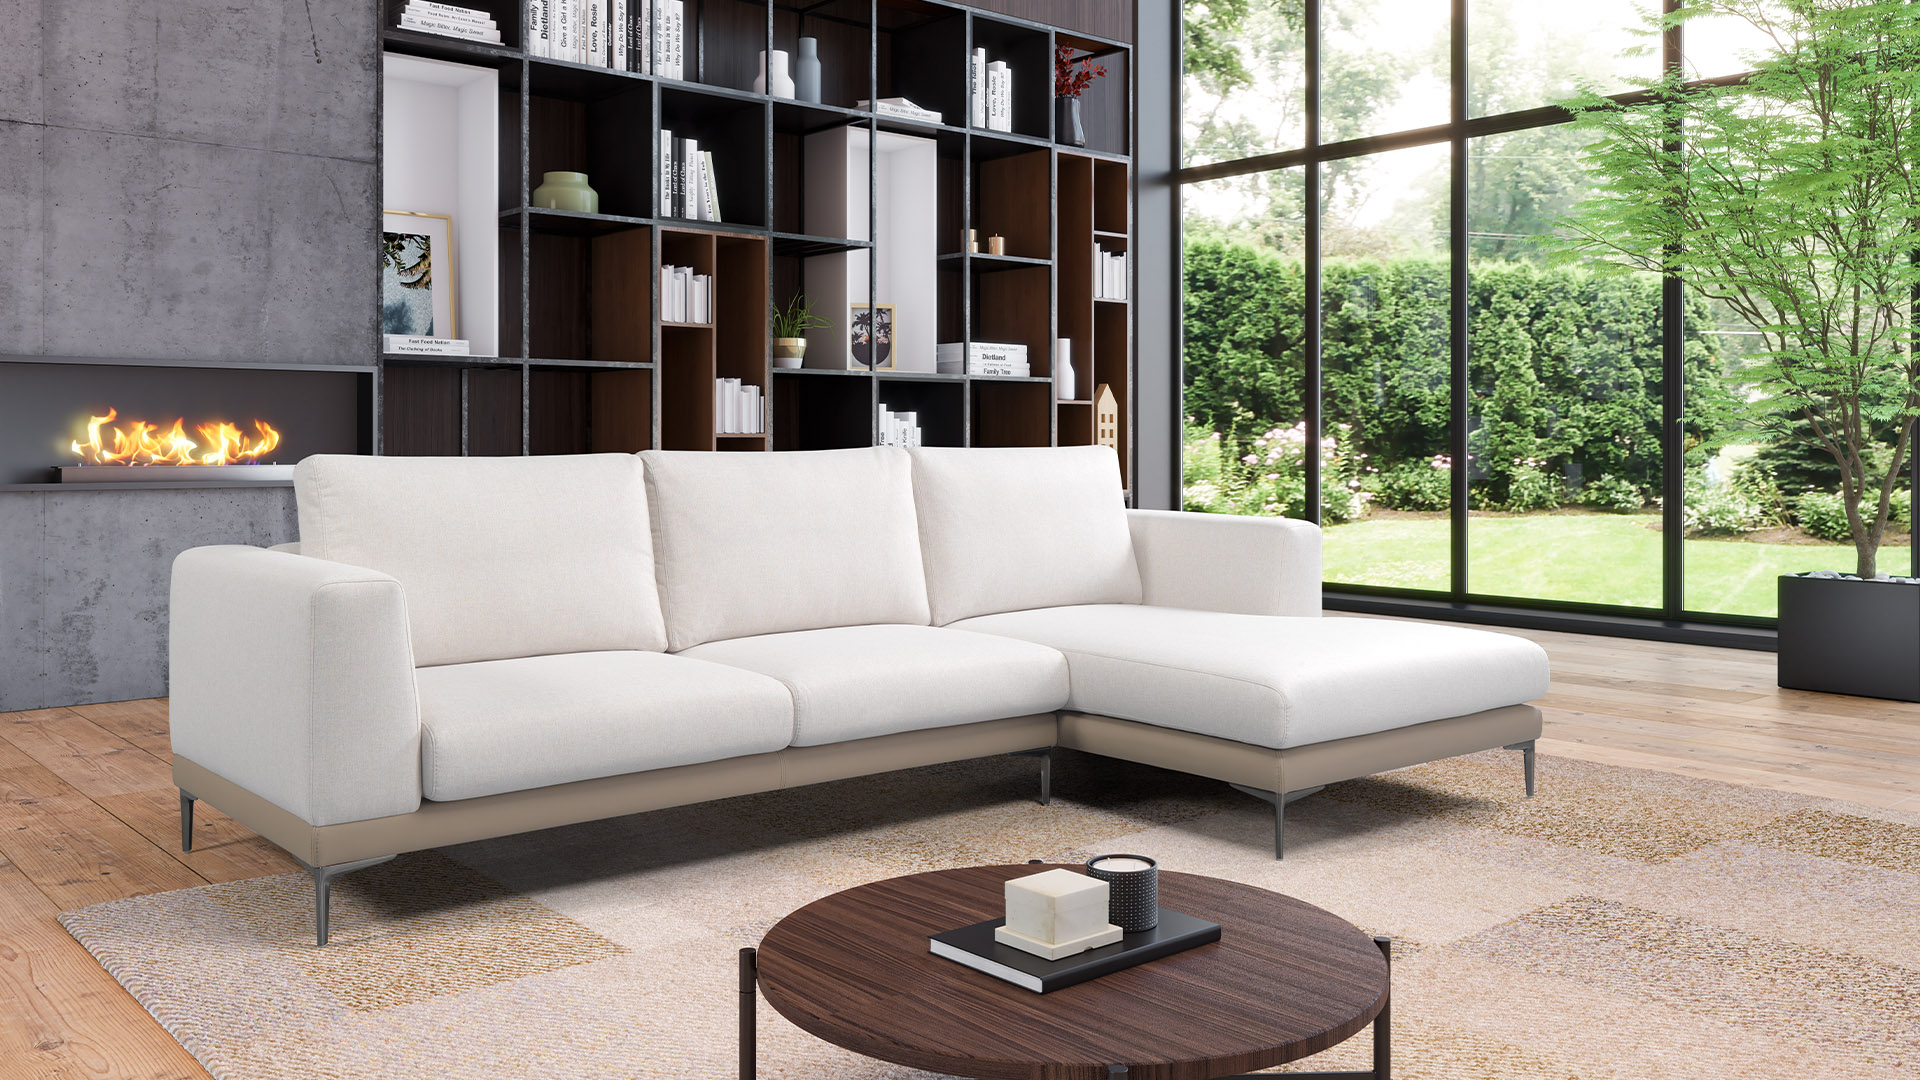 White sofa in a modern living room with wooden coffee table